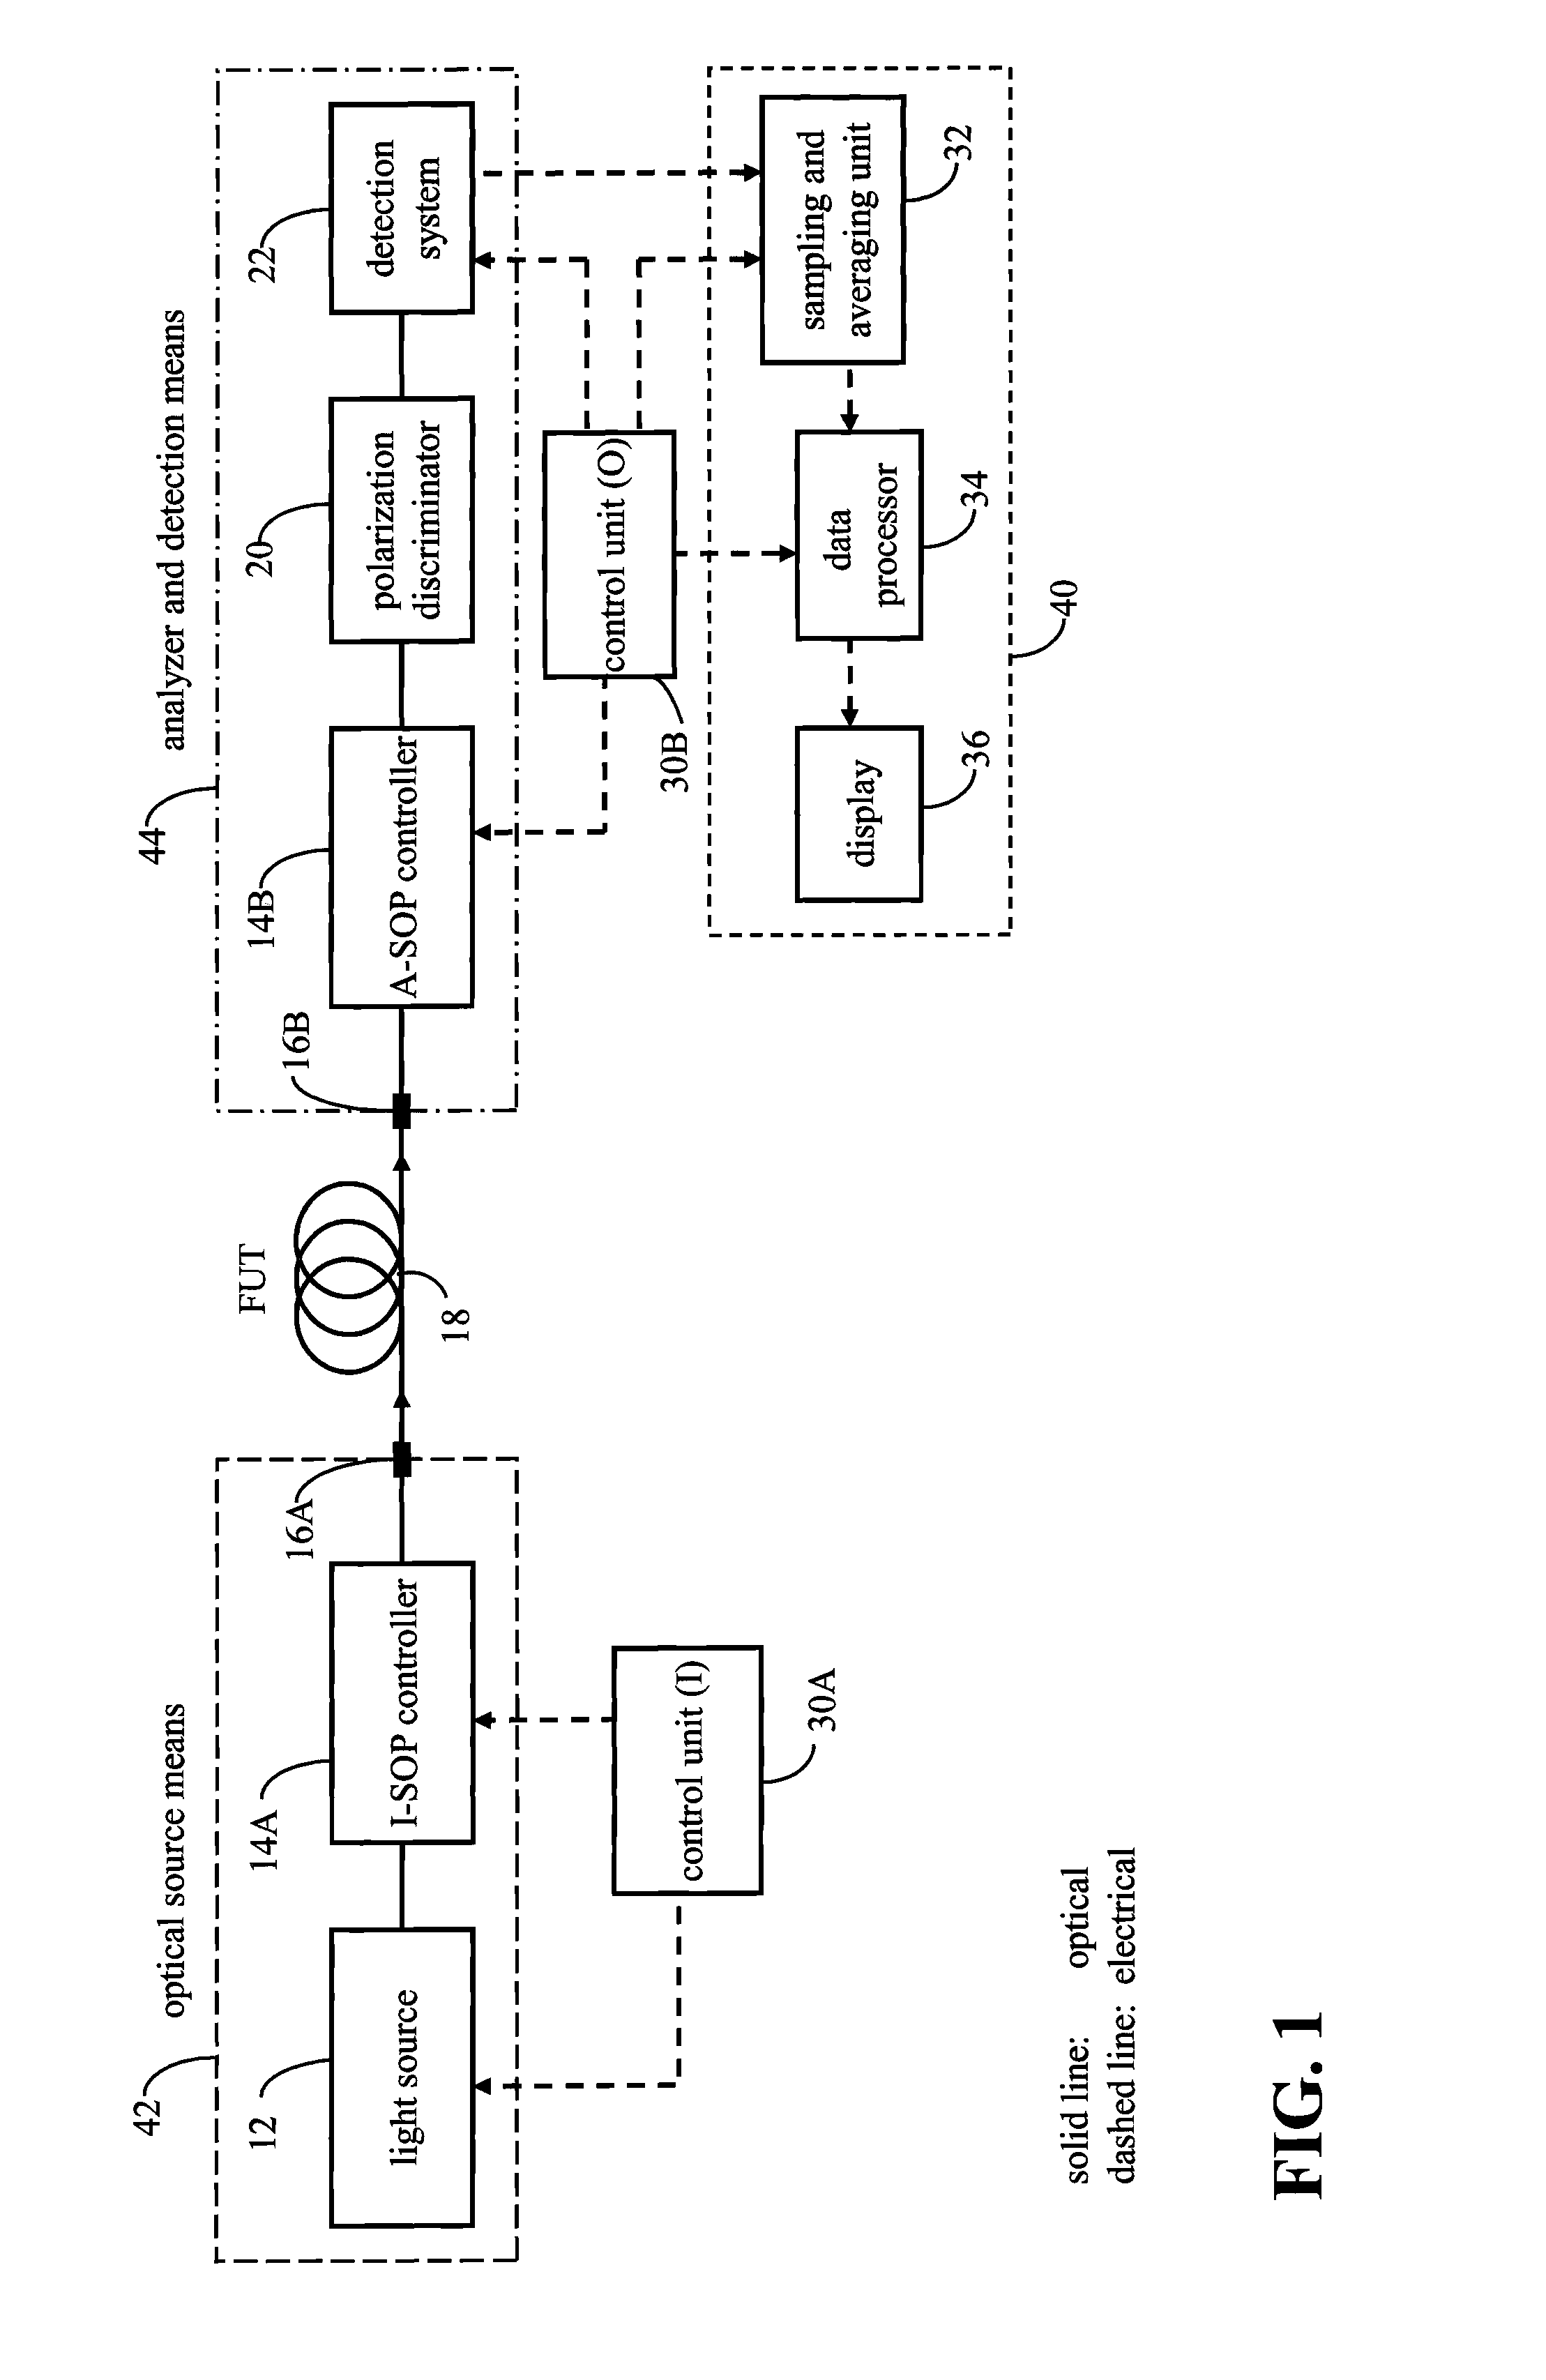 Method and Apparatus for Determining Differential Group Delay and Polarization Mode Dispersion